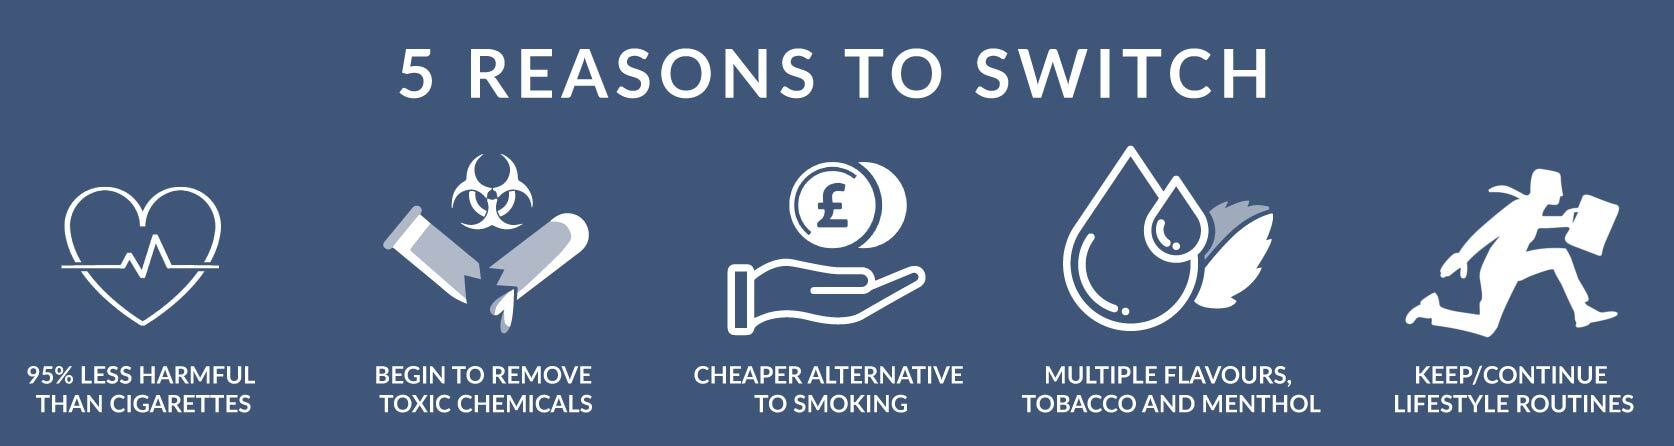 5 Reasons to Switch to Vaping